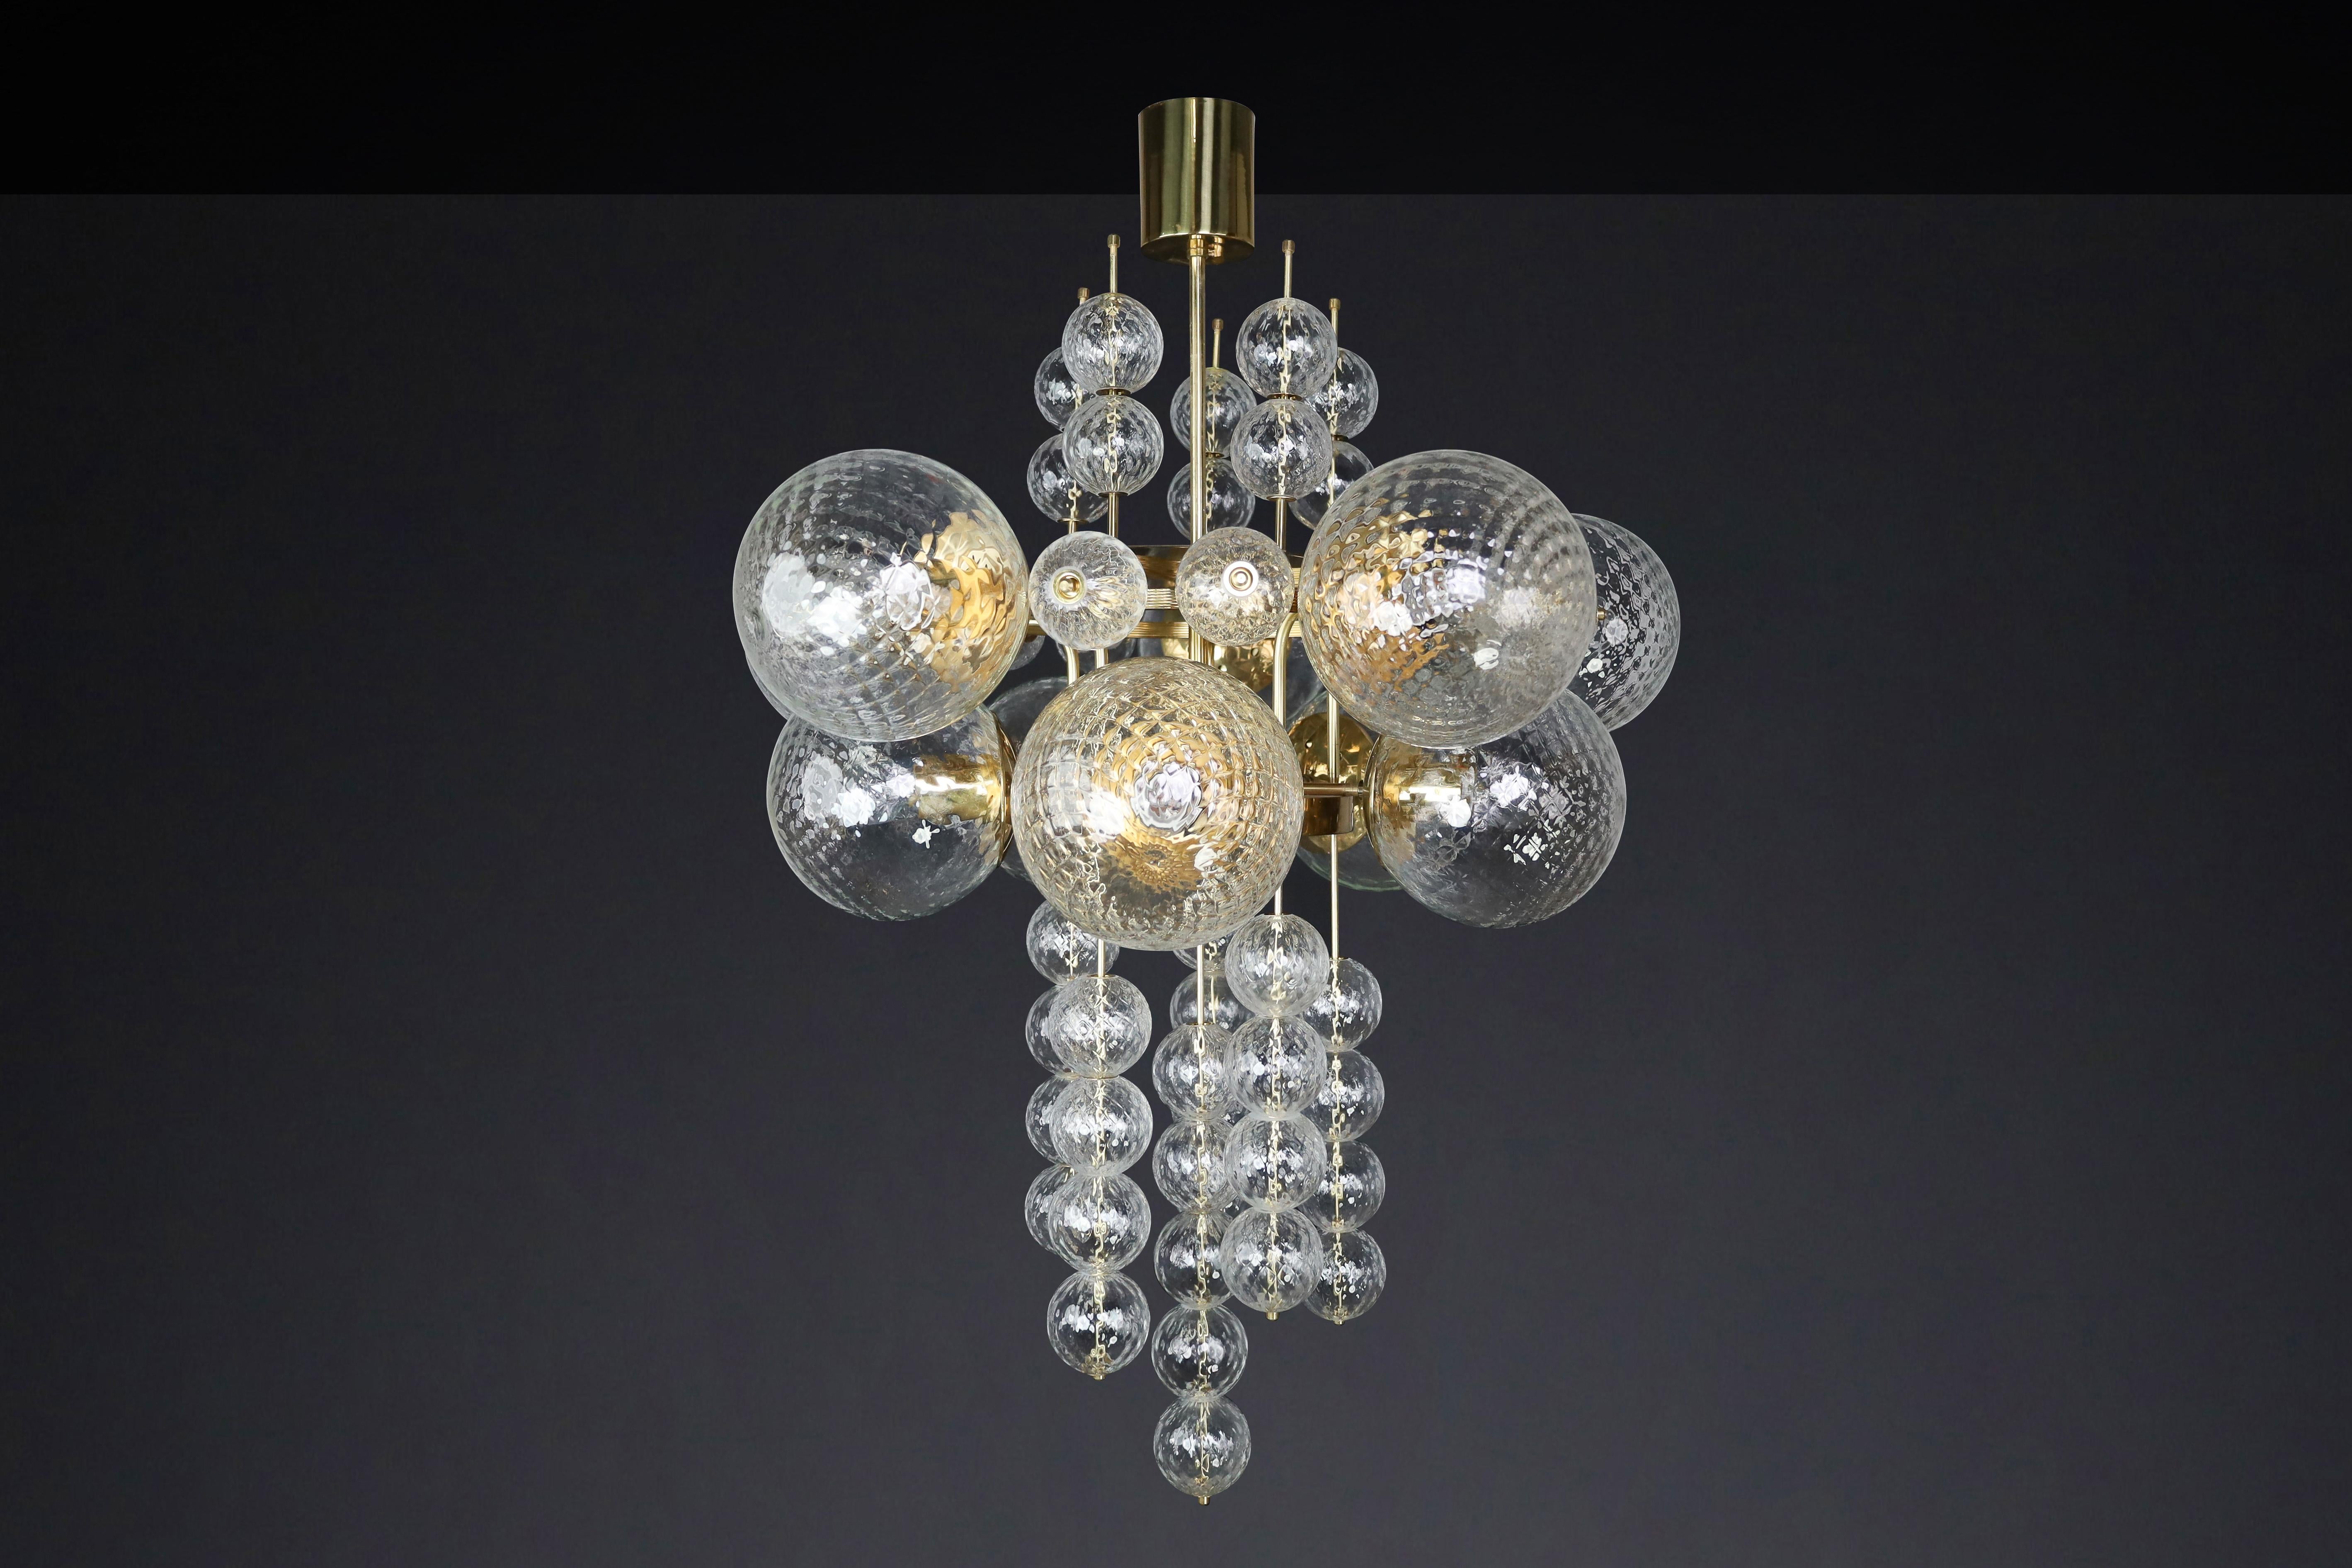 Large Chandelier with brass fixture and hand-blowed glass globes by Preciosa Cz. For Sale 8